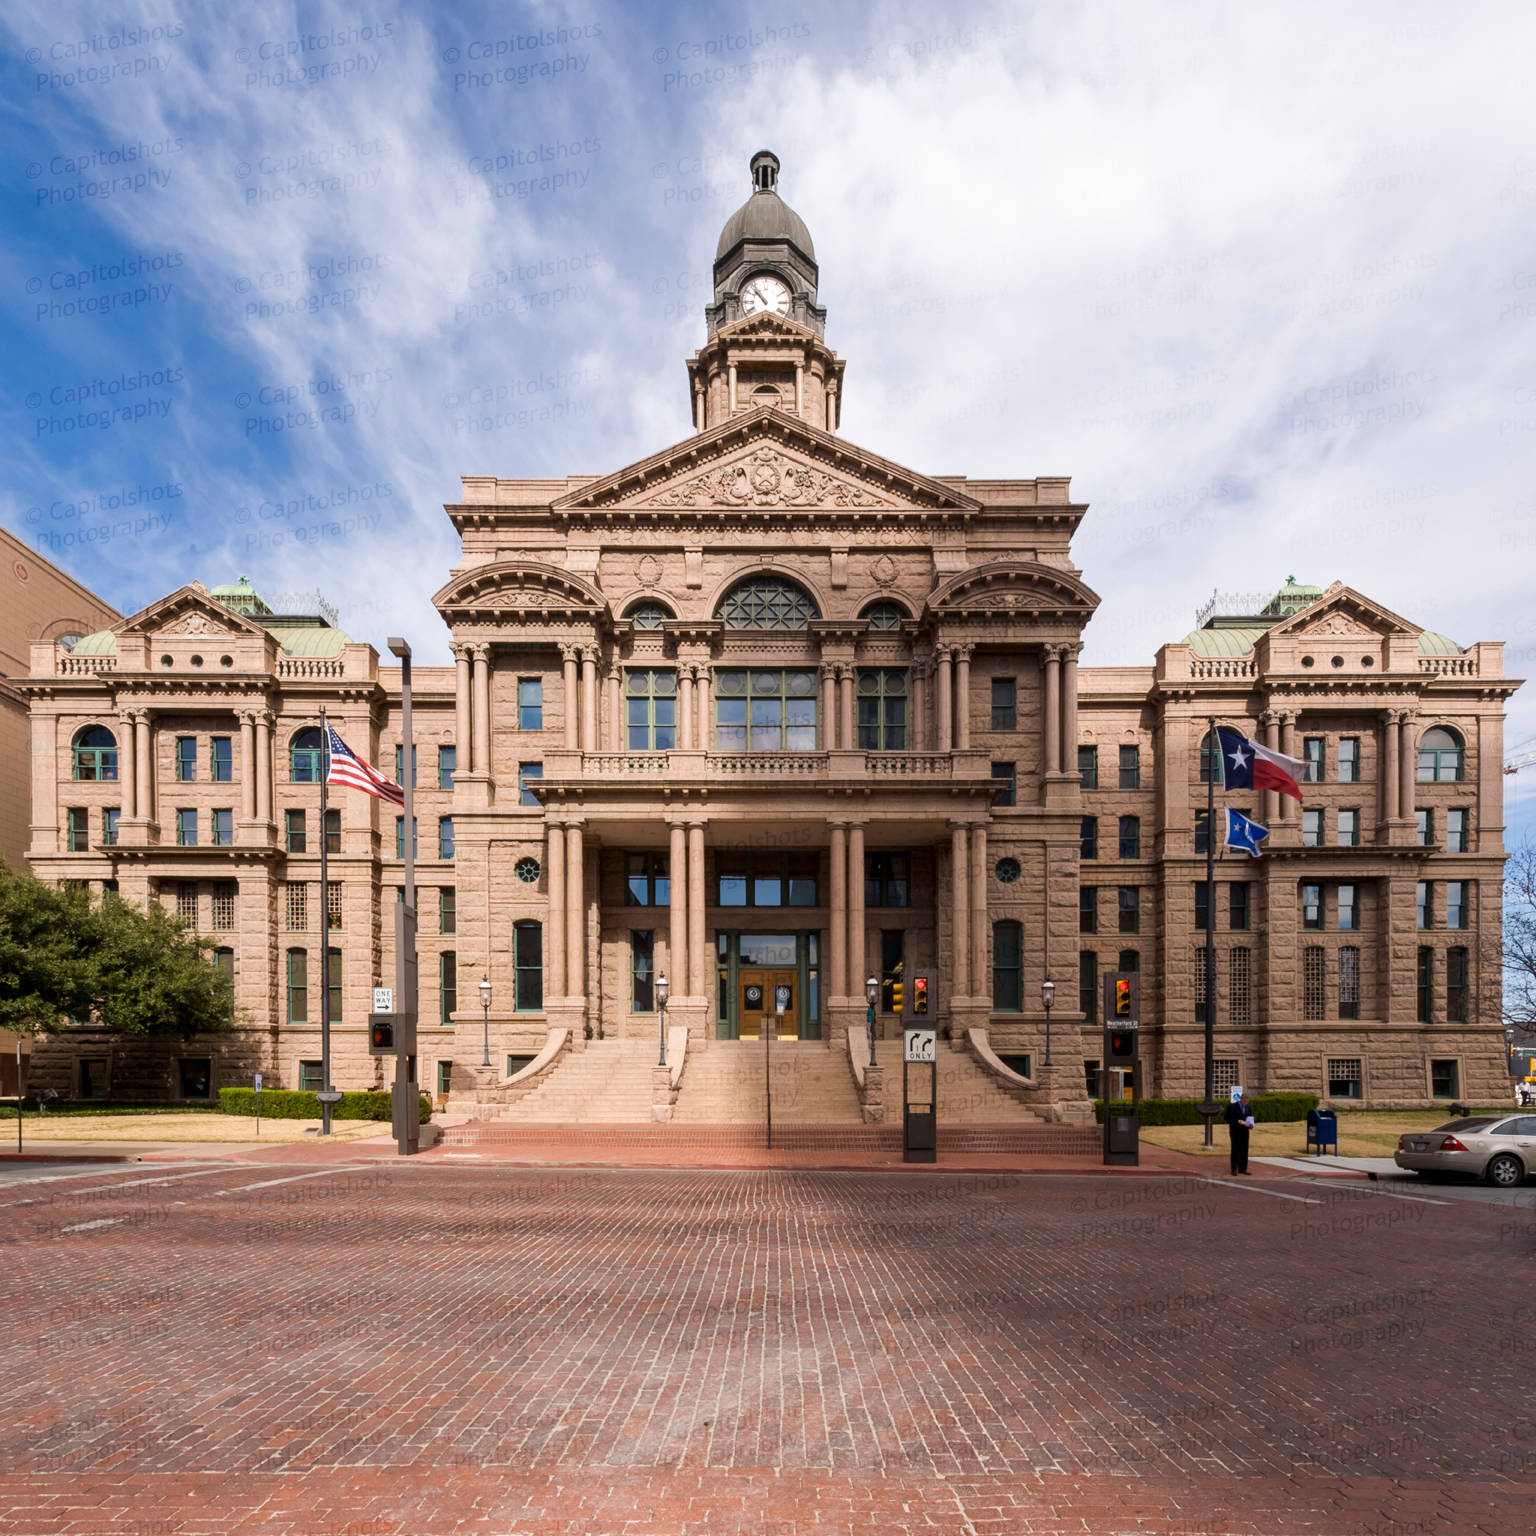 Historic Tarrant County Courthouse in Fort Worth, Texas Wallpaper